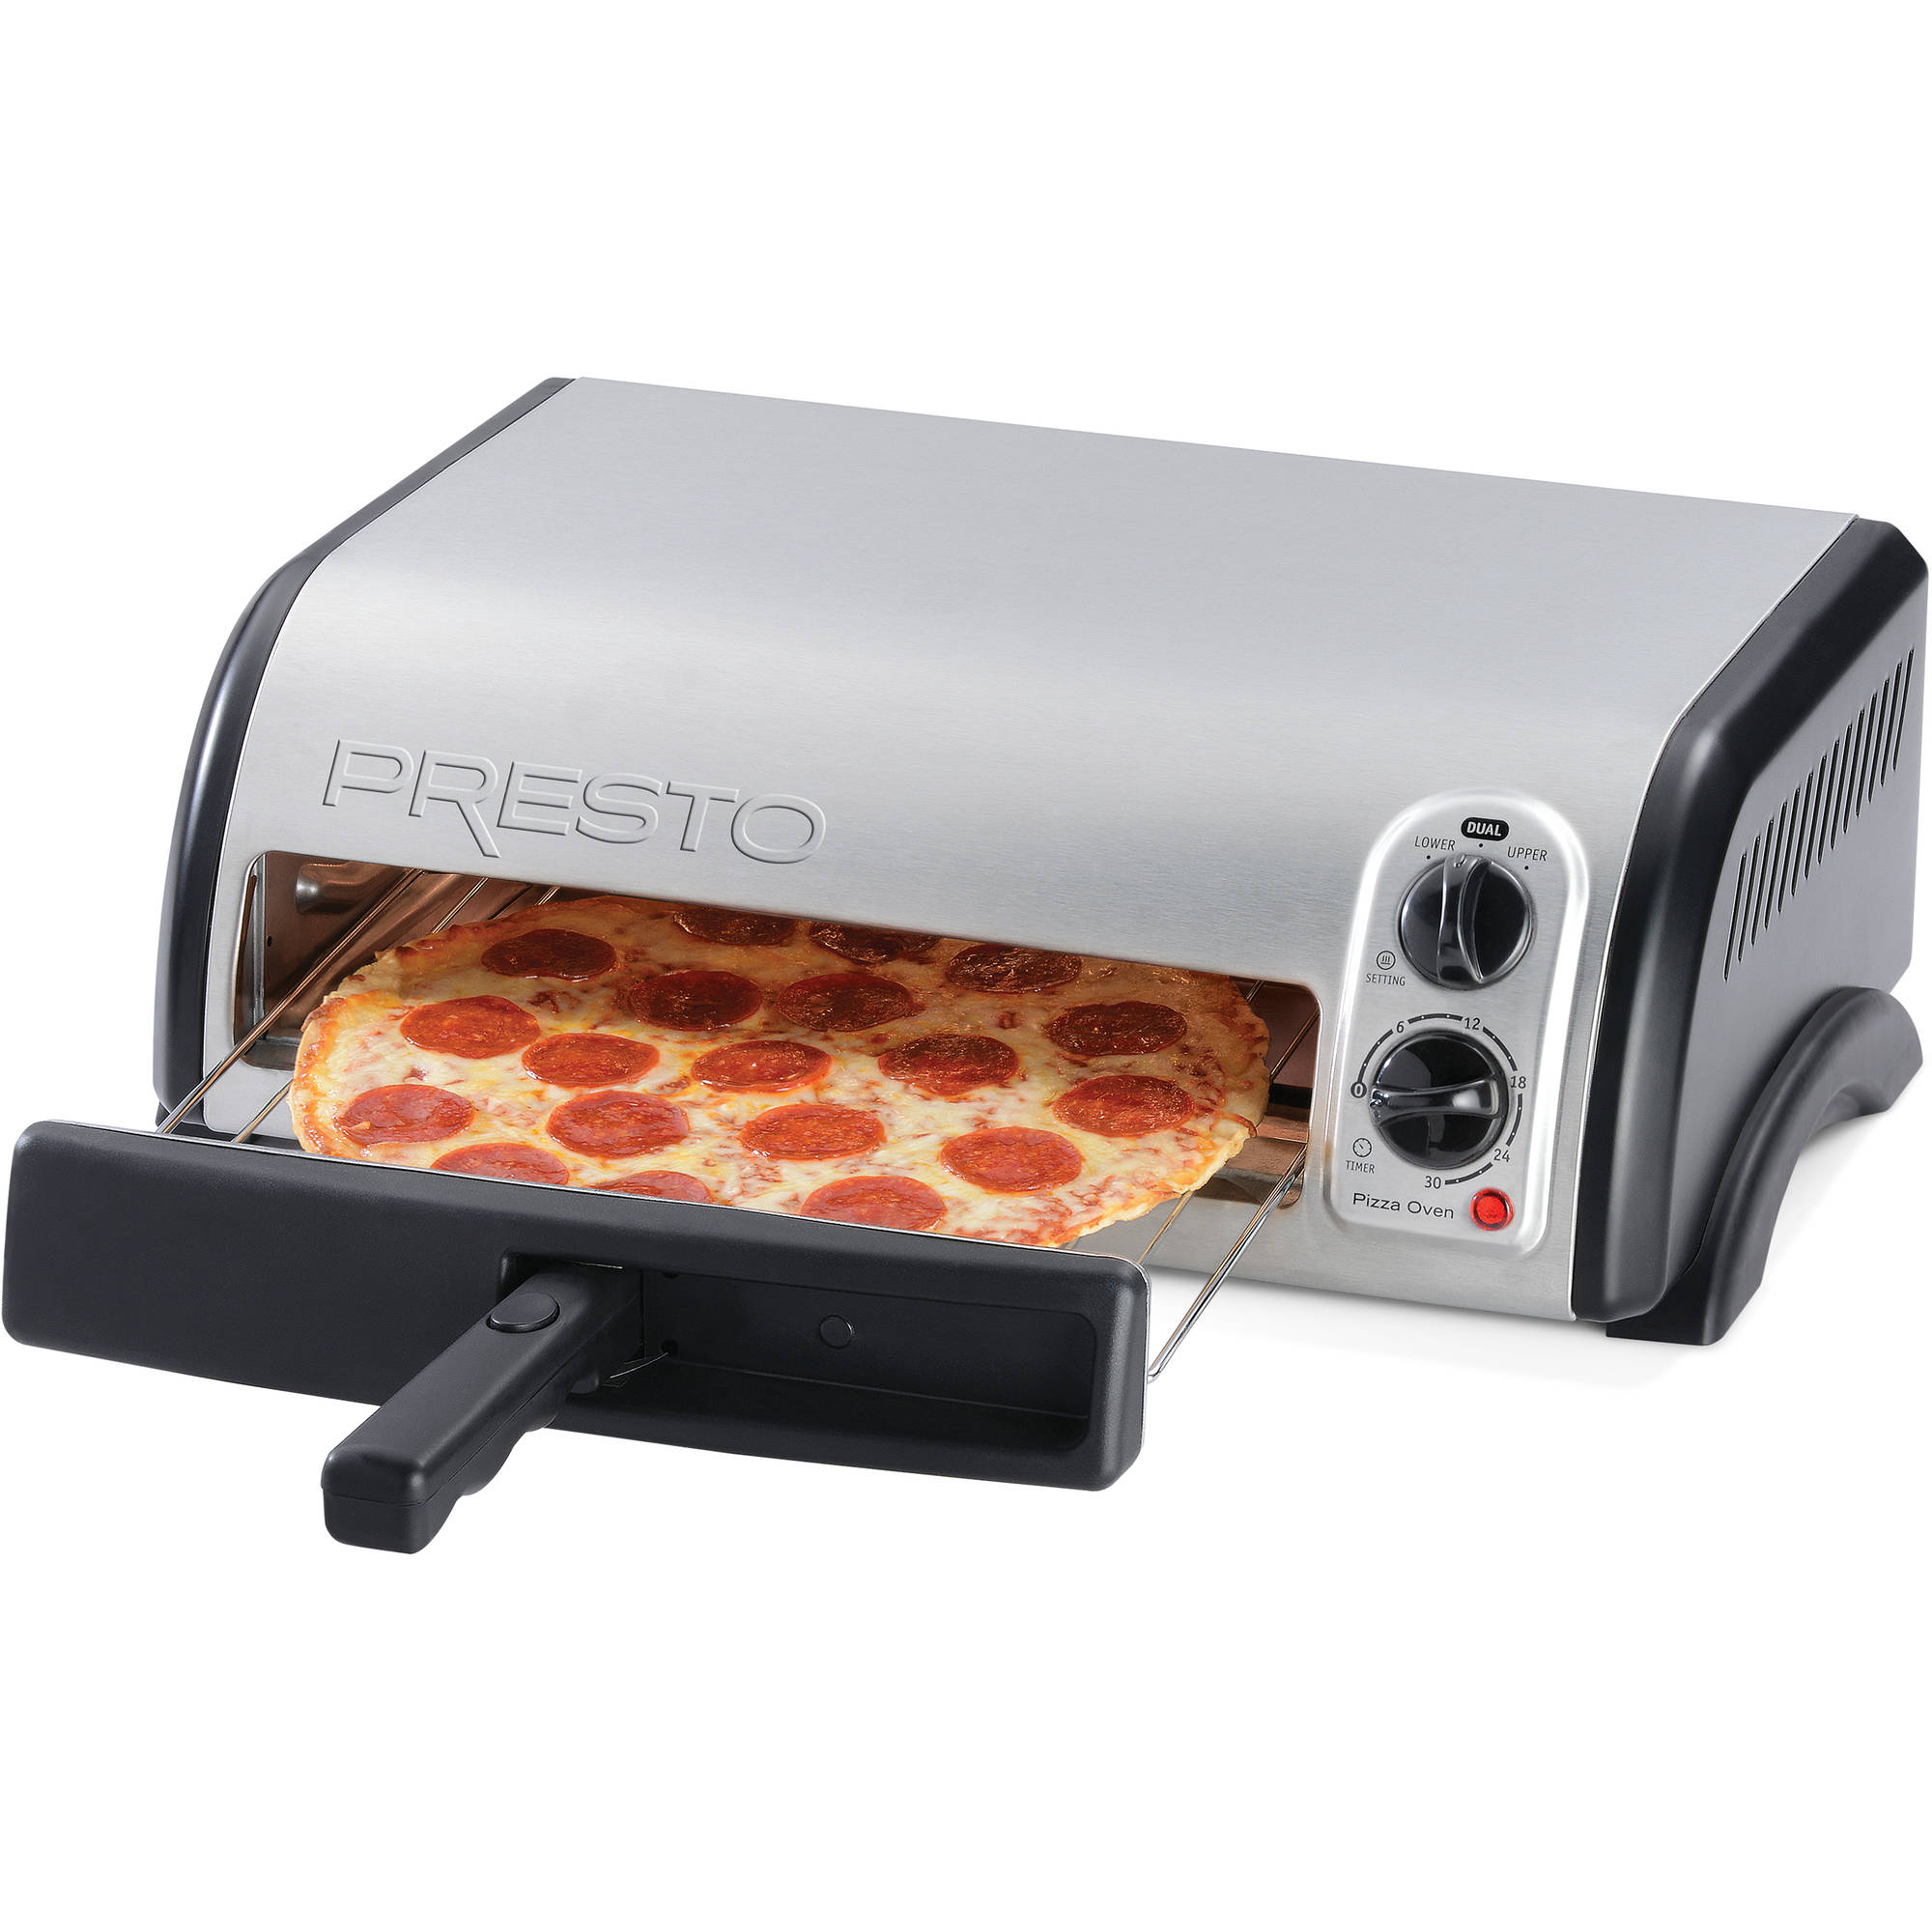 Presto Stainless Steel Pizza Oven 03436 - image 1 of 4